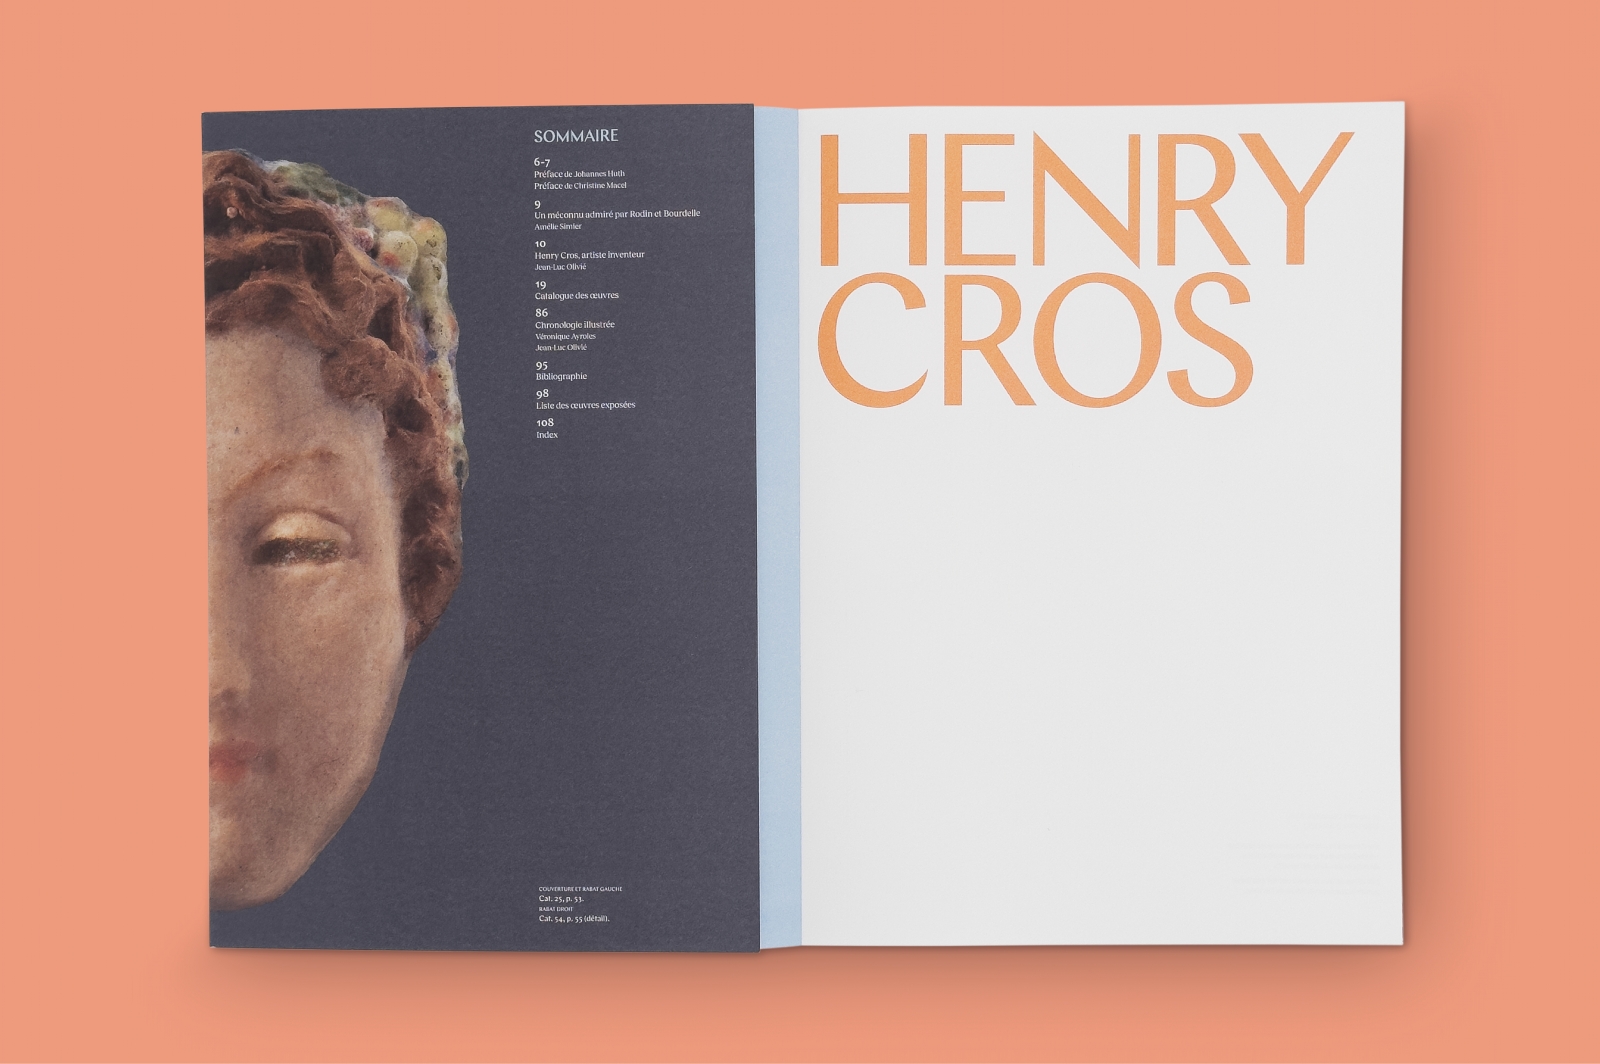 Henry Cros, Sculptor and Draftsman